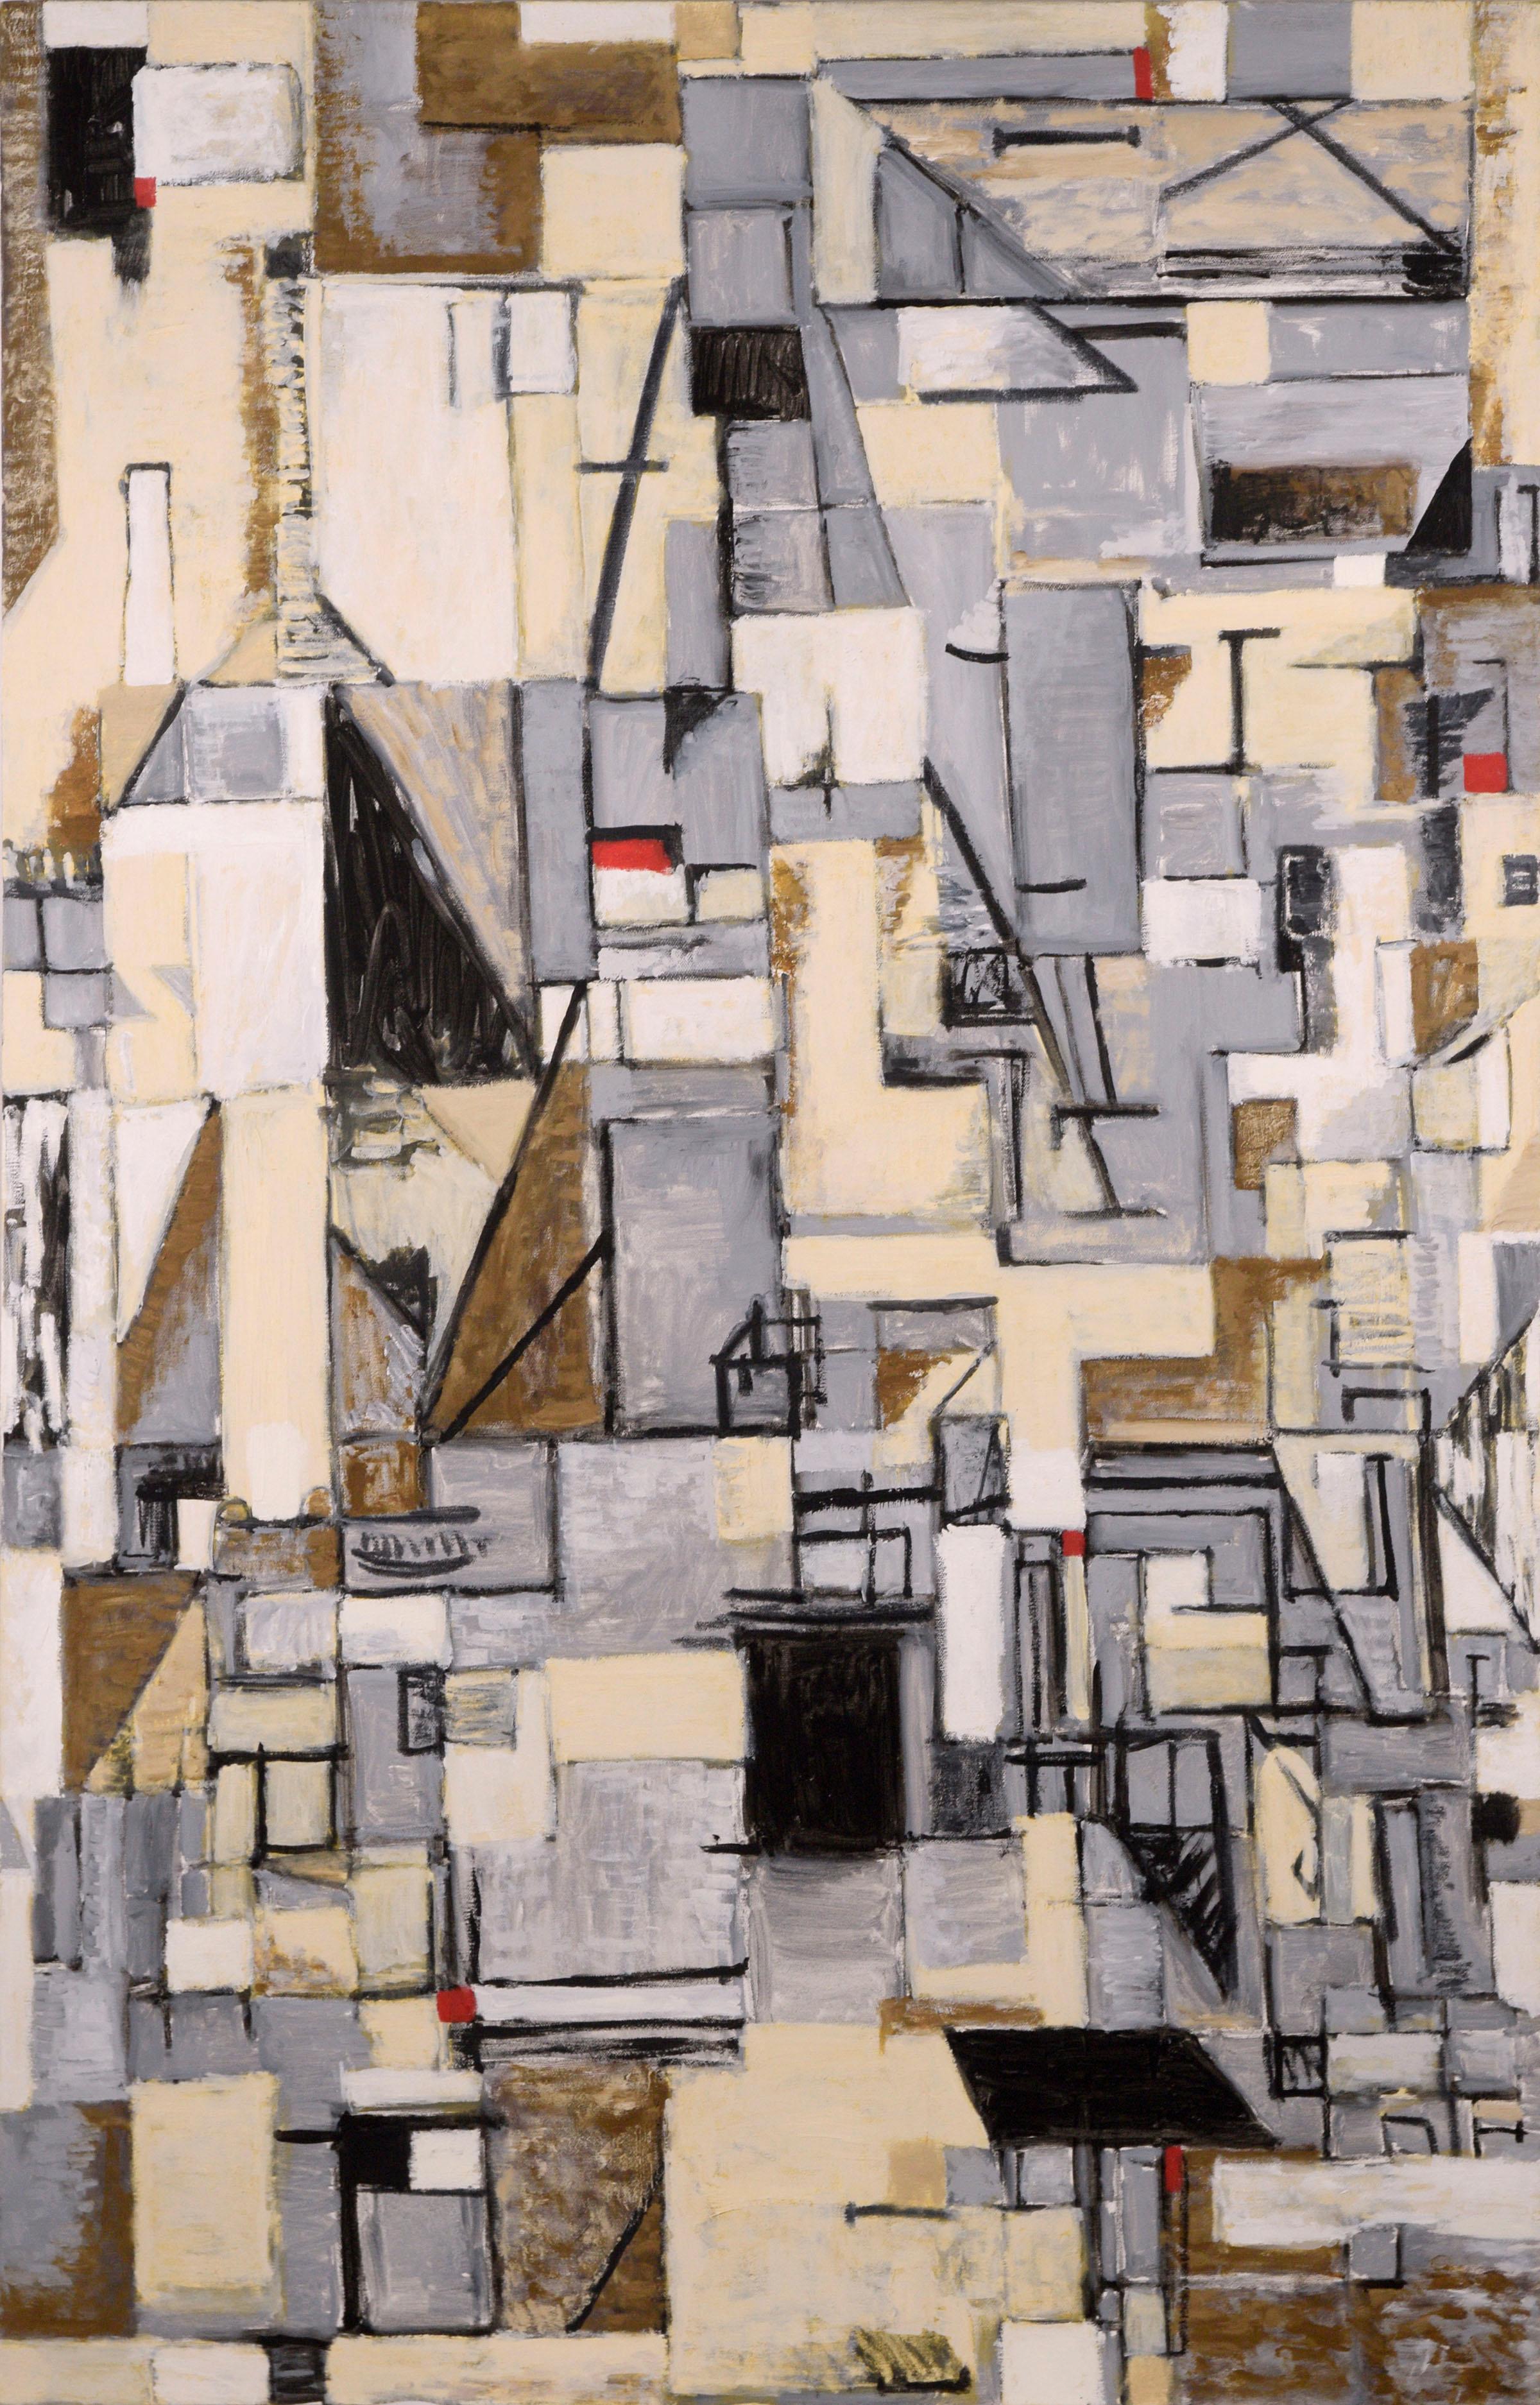 Modern Urban Industrial Cubist Abstract Cityscape in Neutrals with Red 